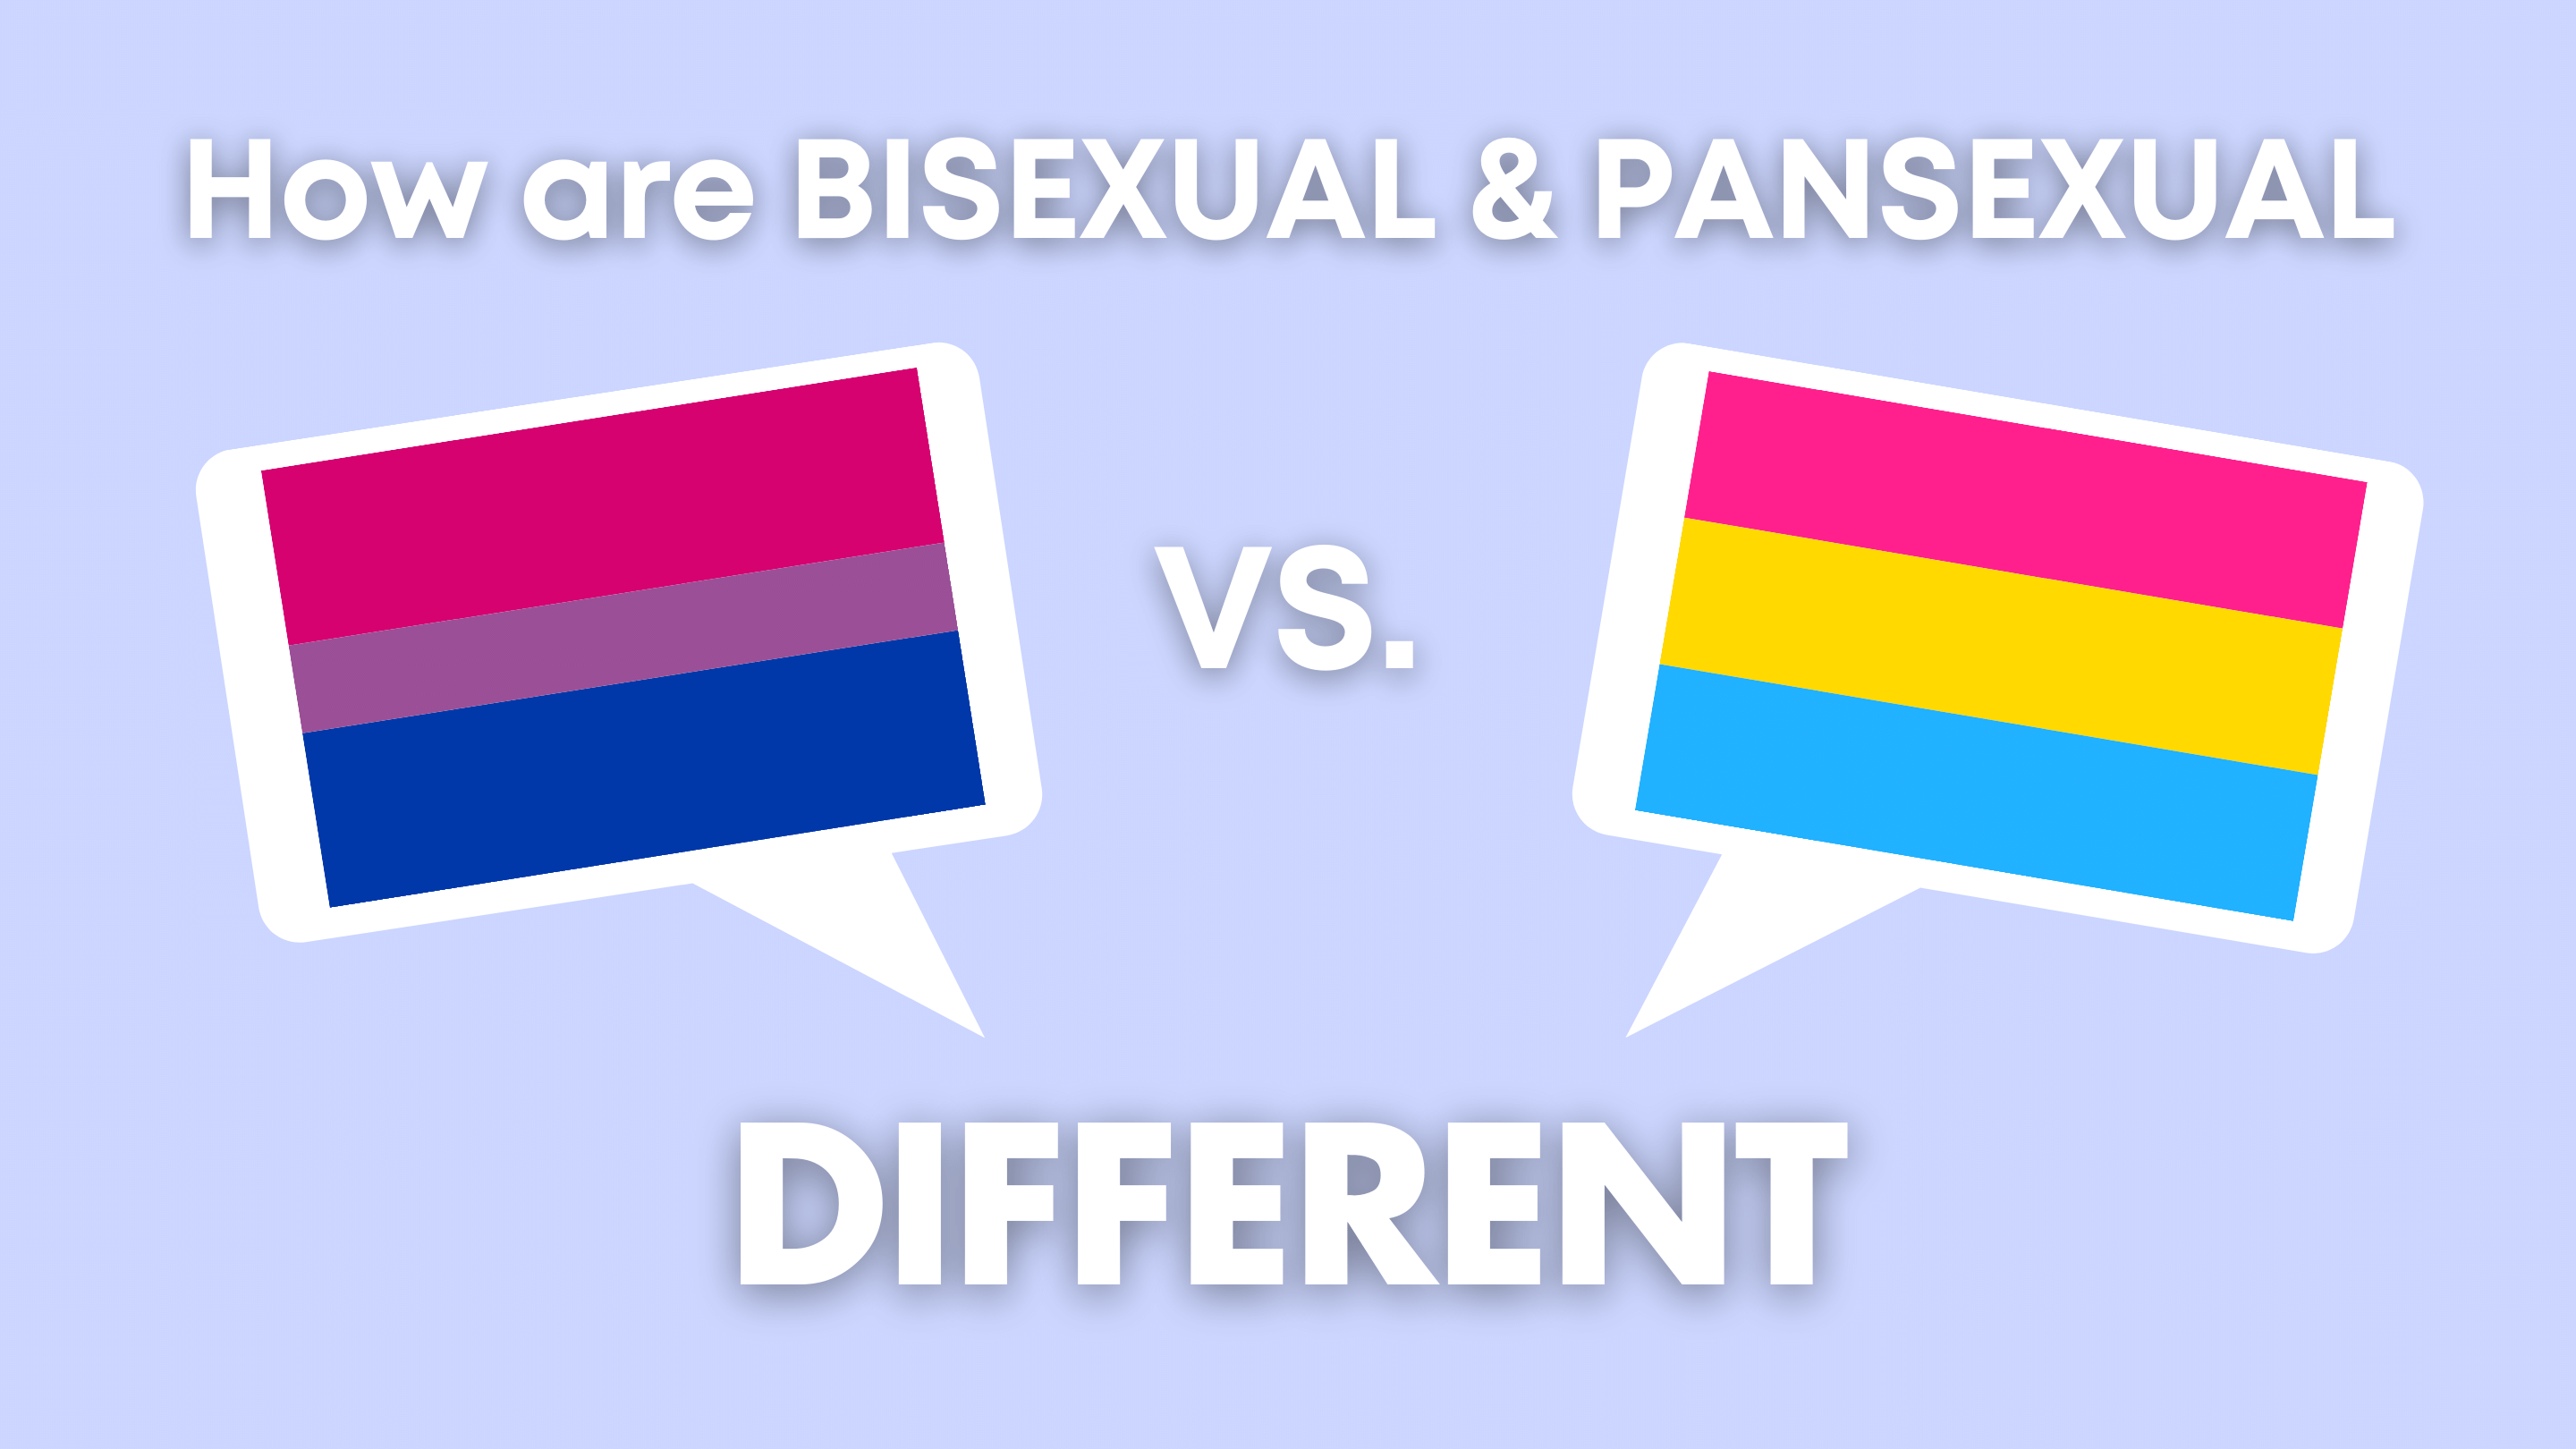 Bisexual vs. Pansexual: What's the Difference?